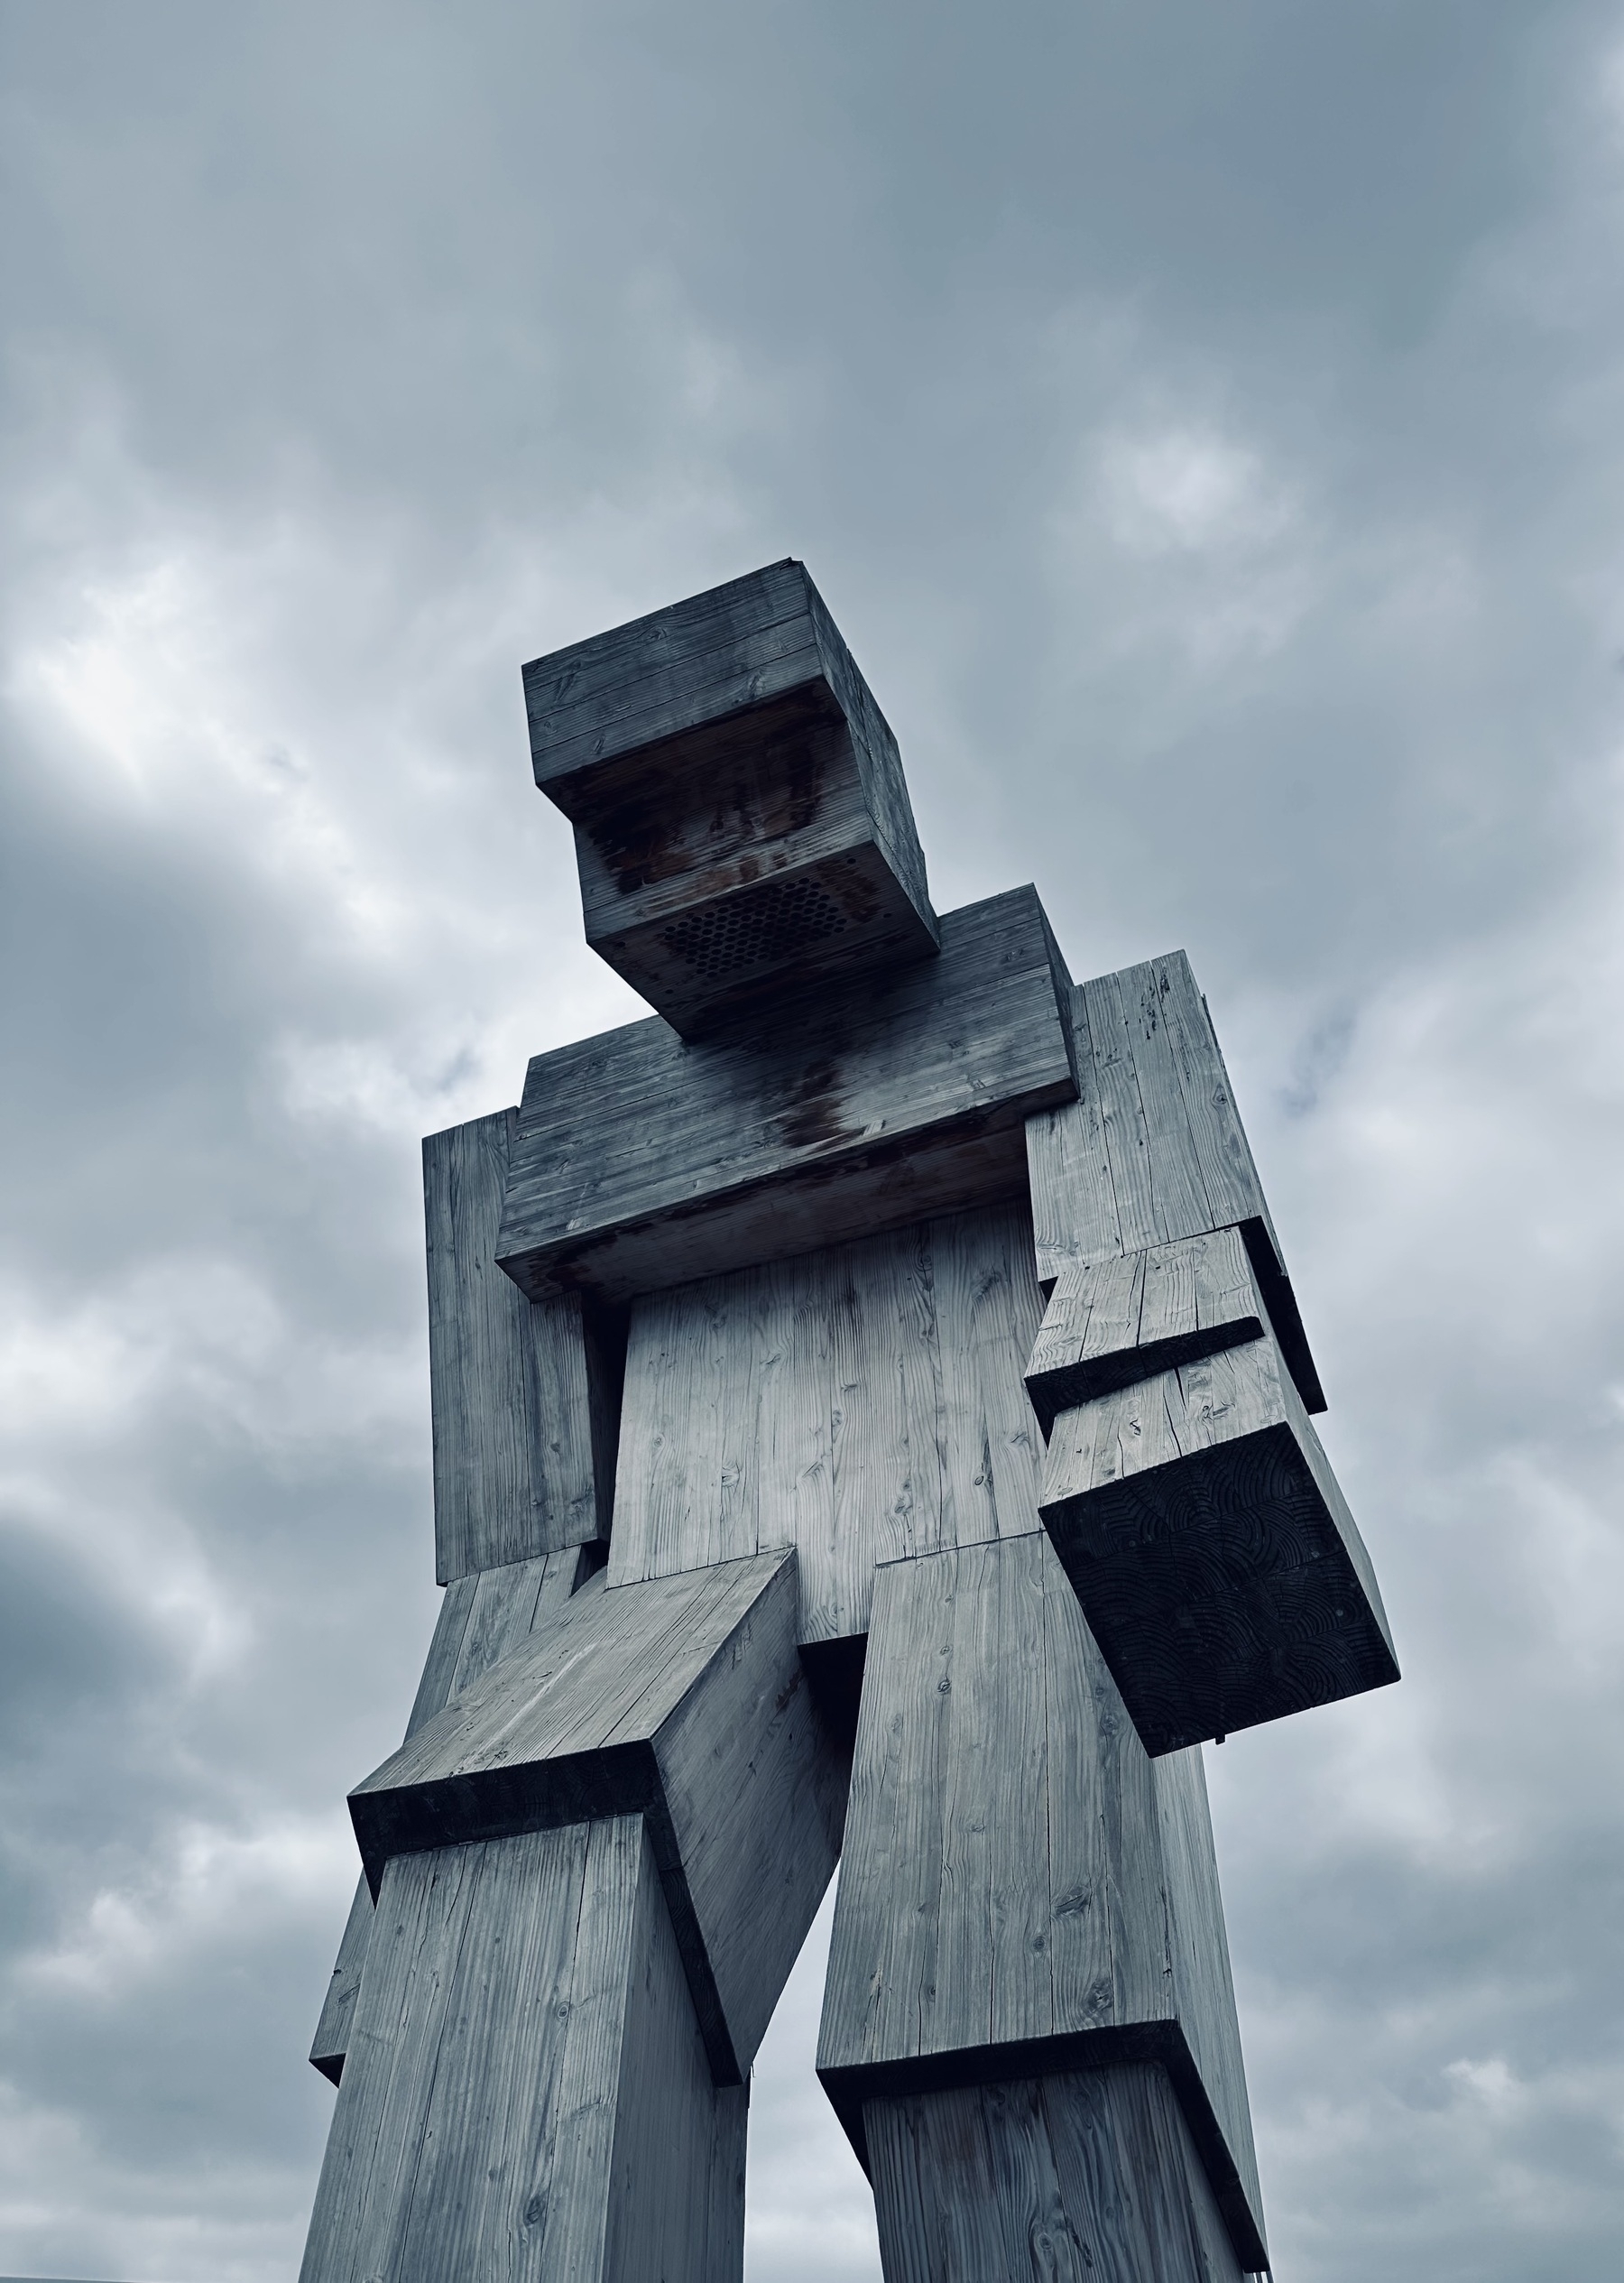 A large blocky figure of a person, made of wood. Cloudy sky in the background.